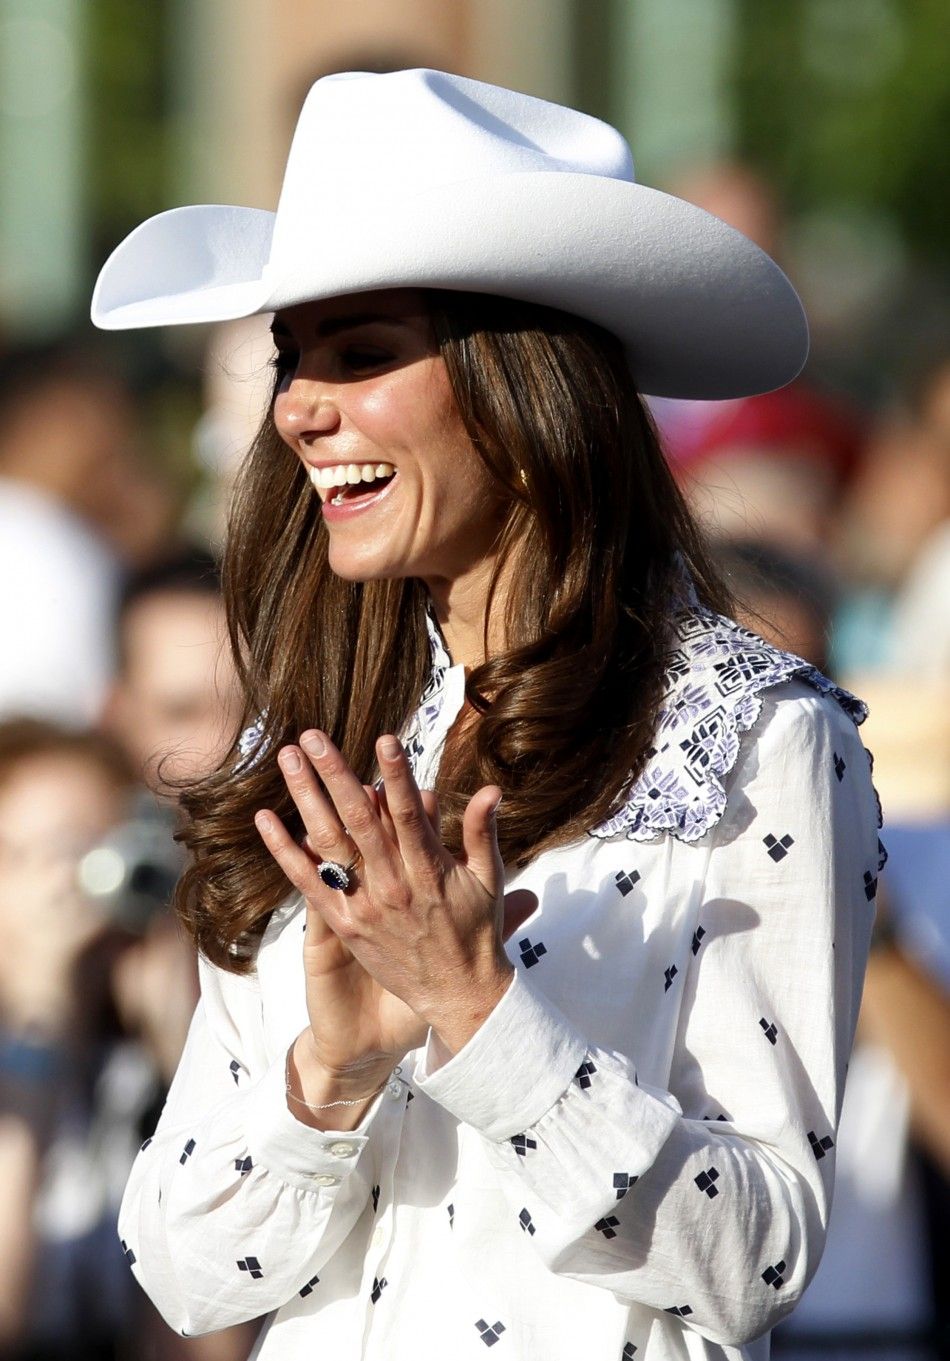 Catherine, Duchess of Cambridge, wears a cowboy hat as she attends a Canadian government reception in Calgary